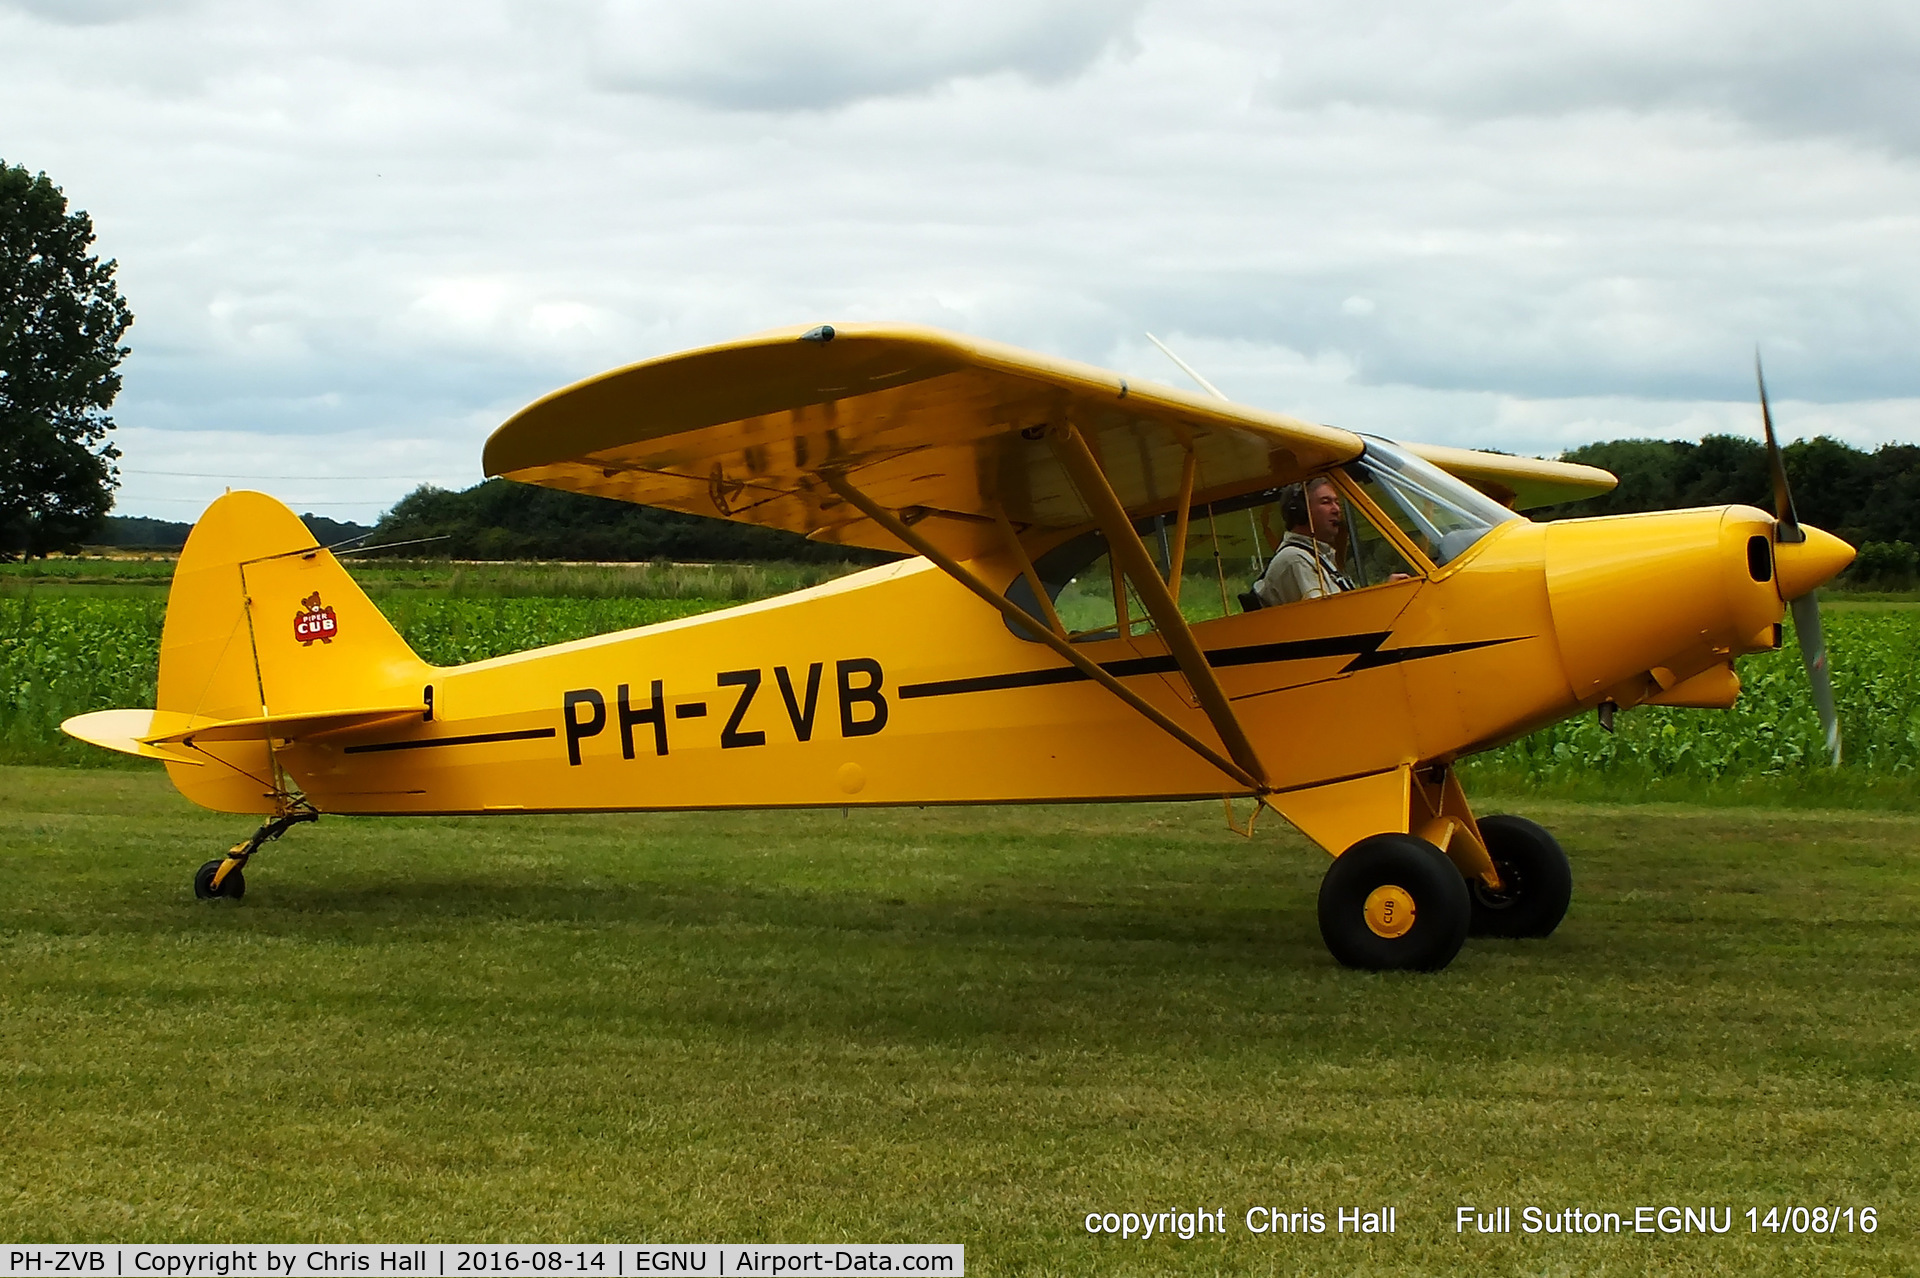 PH-ZVB, 1976 Piper PA-18-150 Super Cub Super Cub C/N 18-7609021, at the LAA Vale of York Strut fly-in, Full Sutton